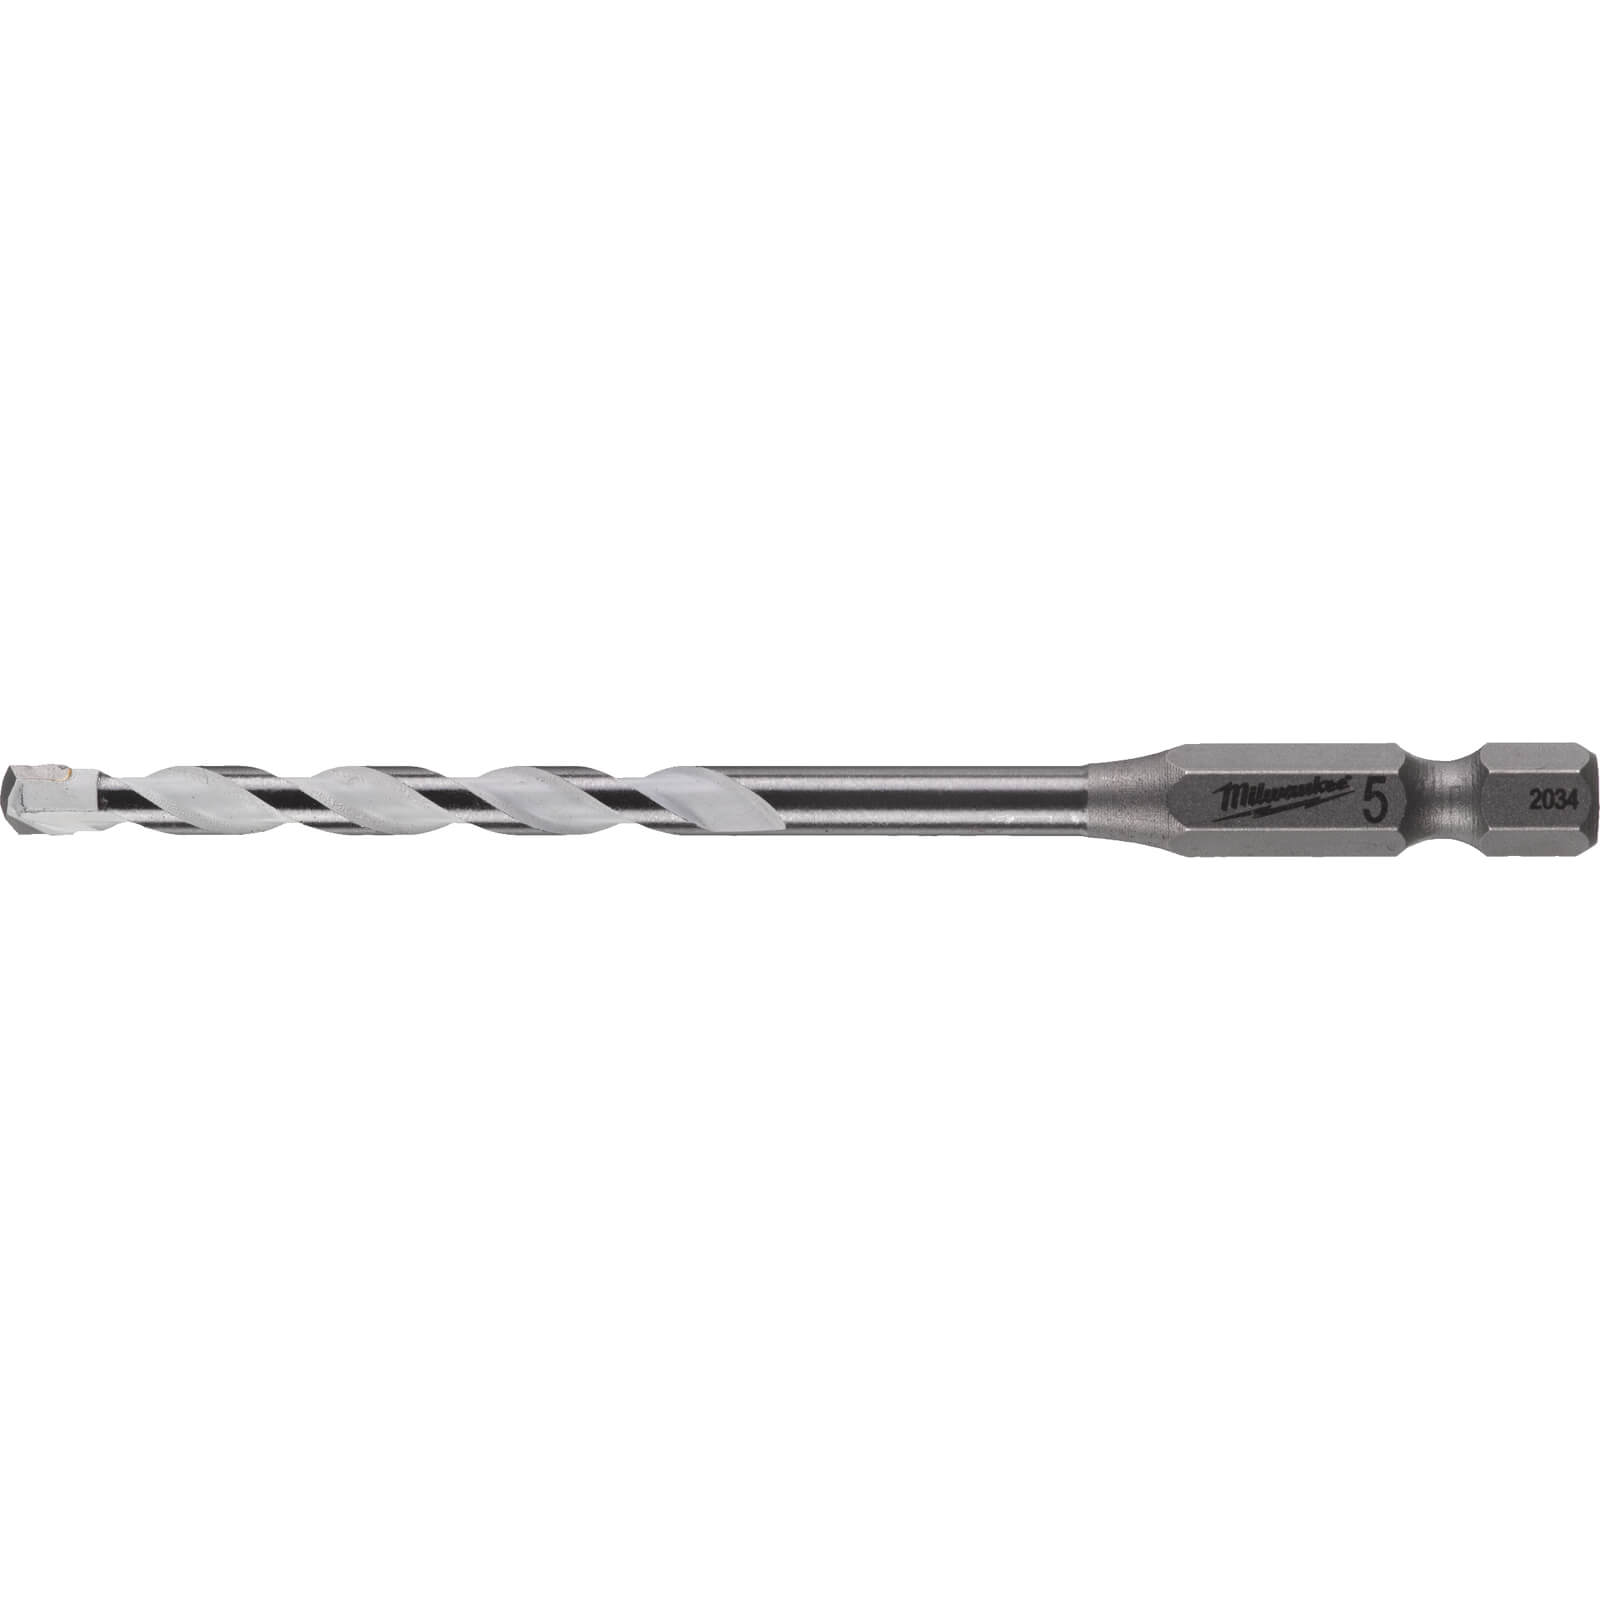 Photos - Drill Bit Milwaukee Multi Material Drill 5mm 100mm Pack of 1 4932471093 